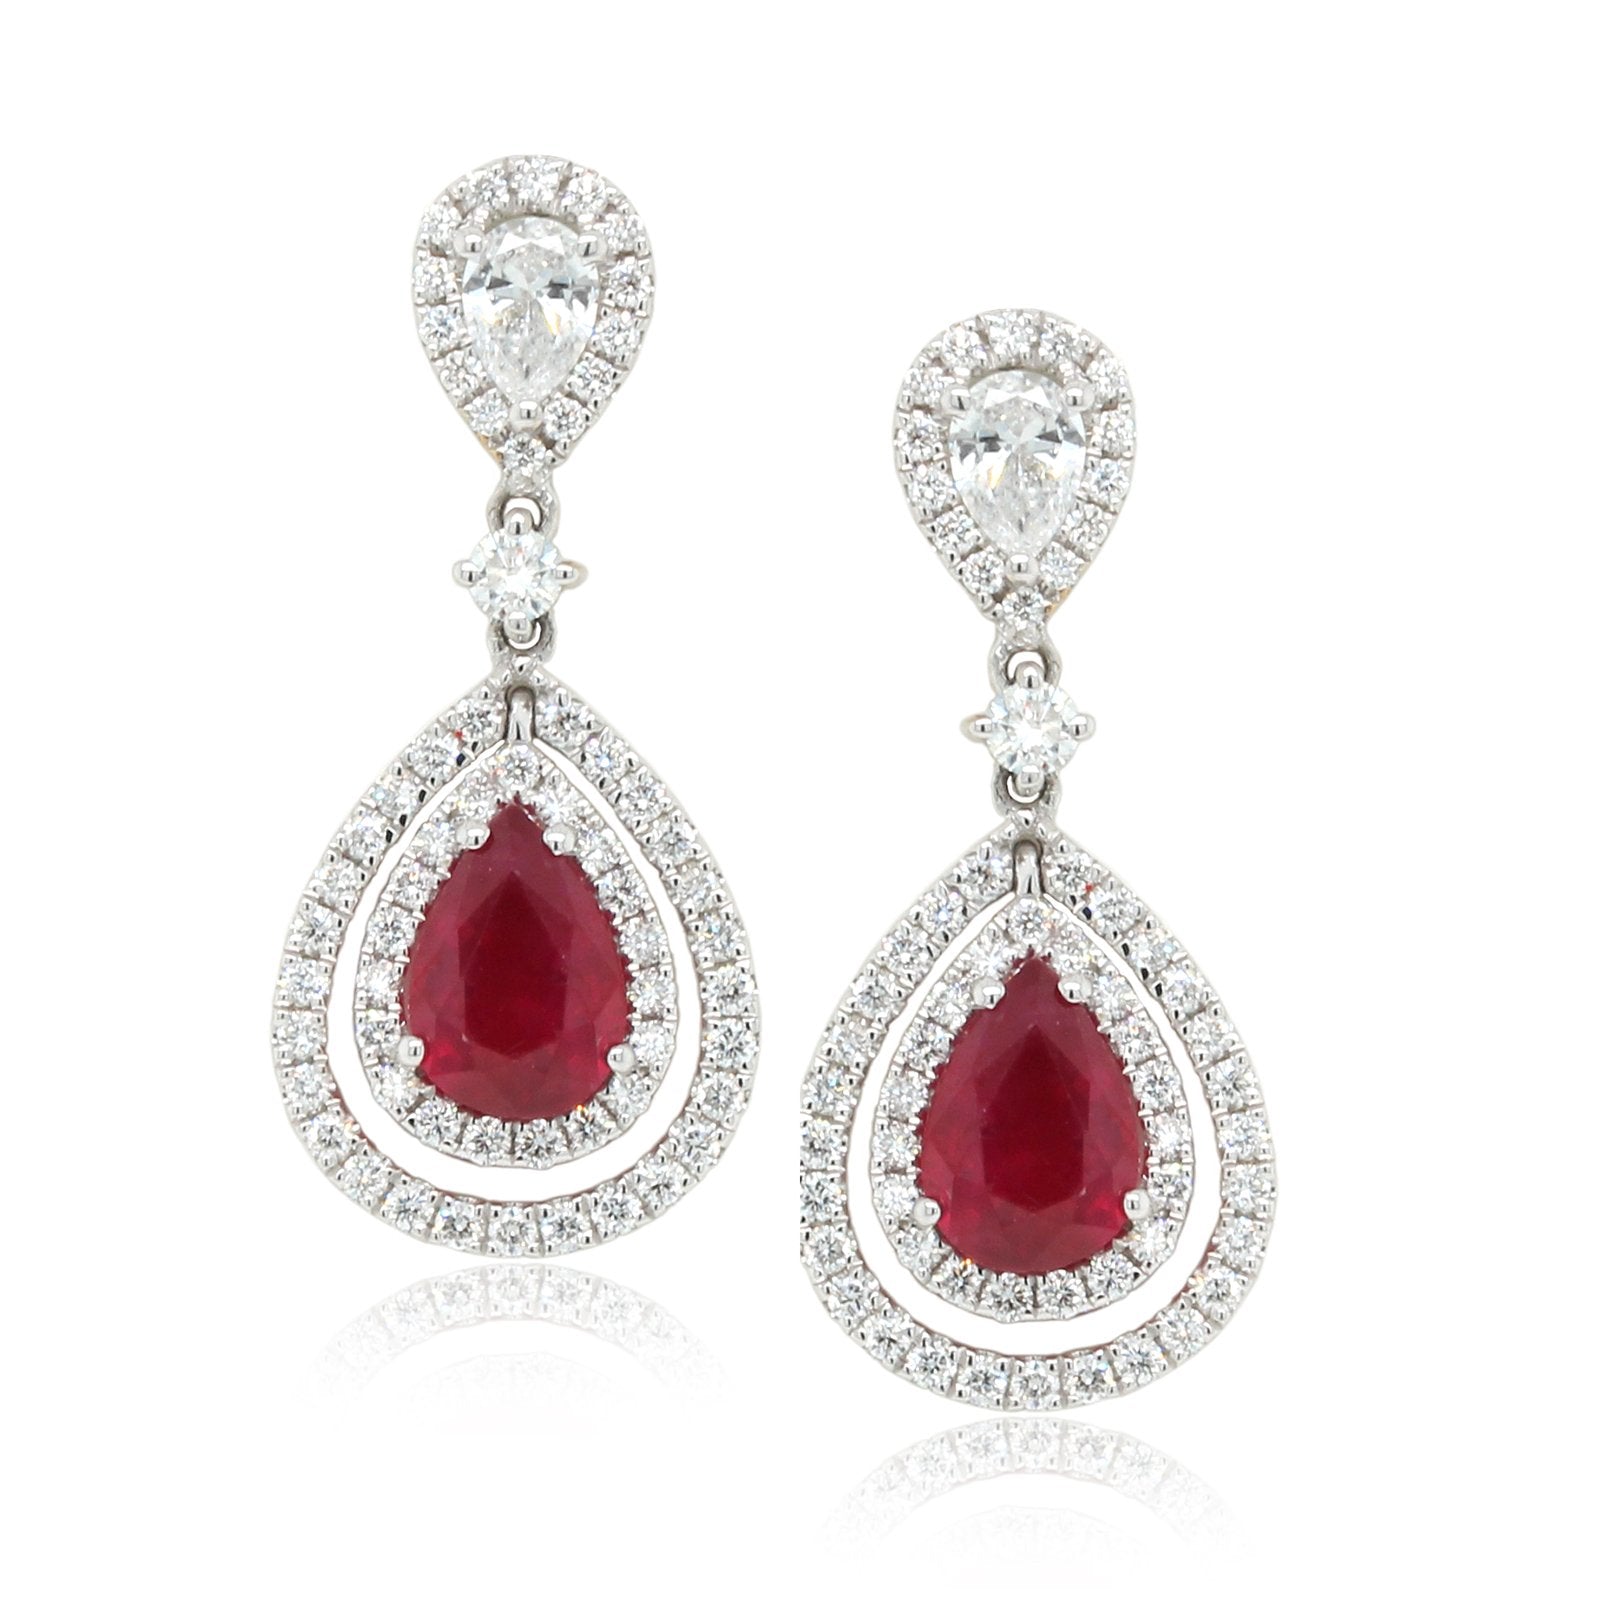 18K White Gold Pear Shaped Double Halo Ruby and Diamond Earrings